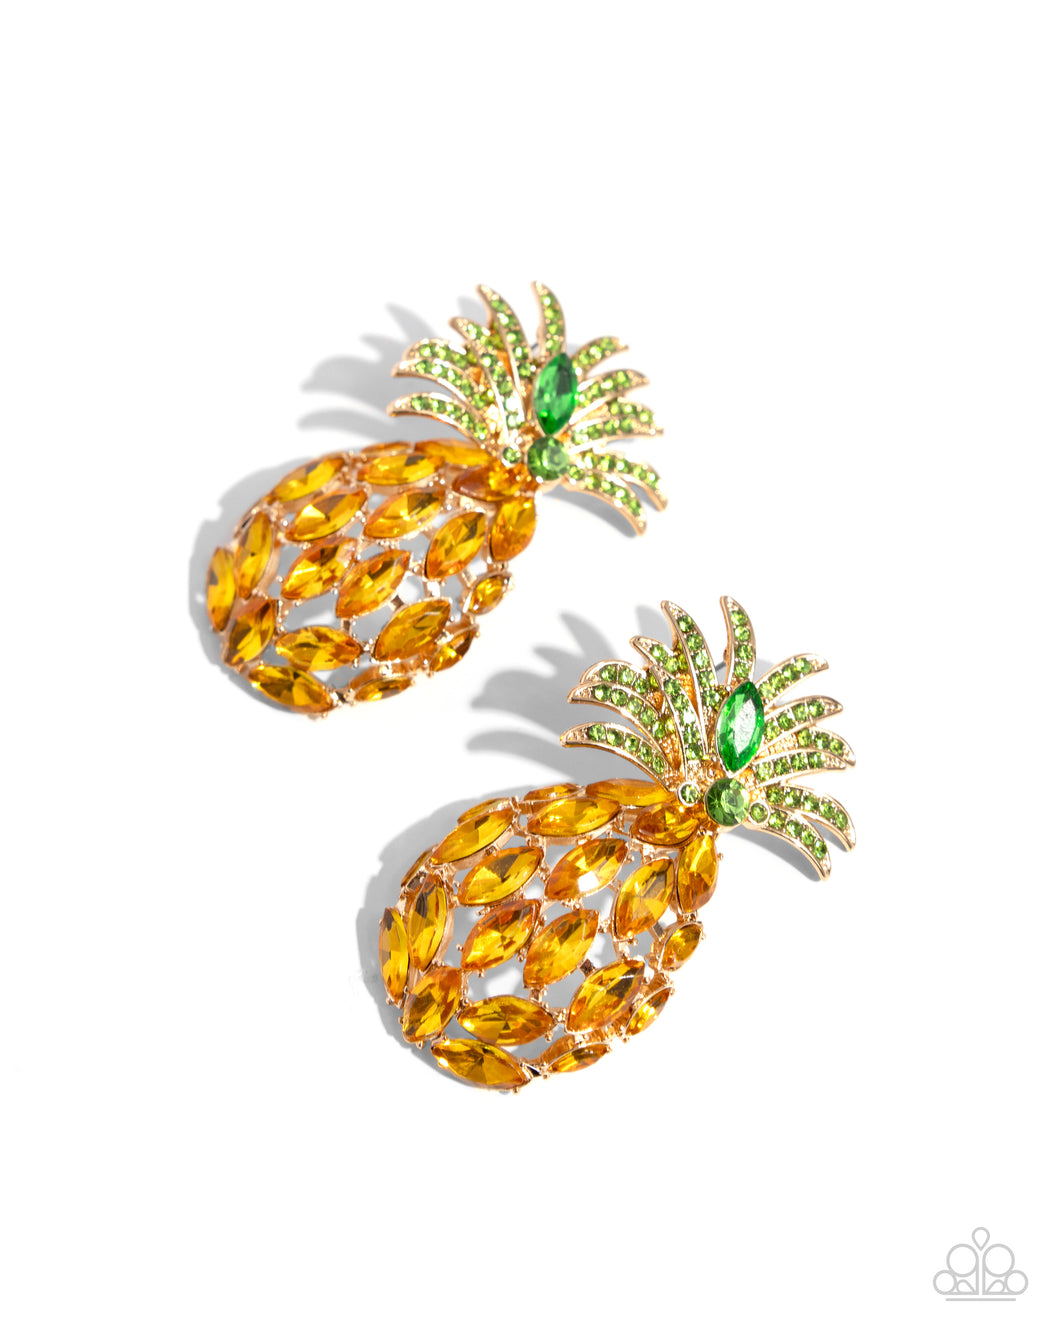 oak-sisters-jewelry-pineapple-pizzazz-yellow-post earrings-paparazzi-accessories-by-lisa